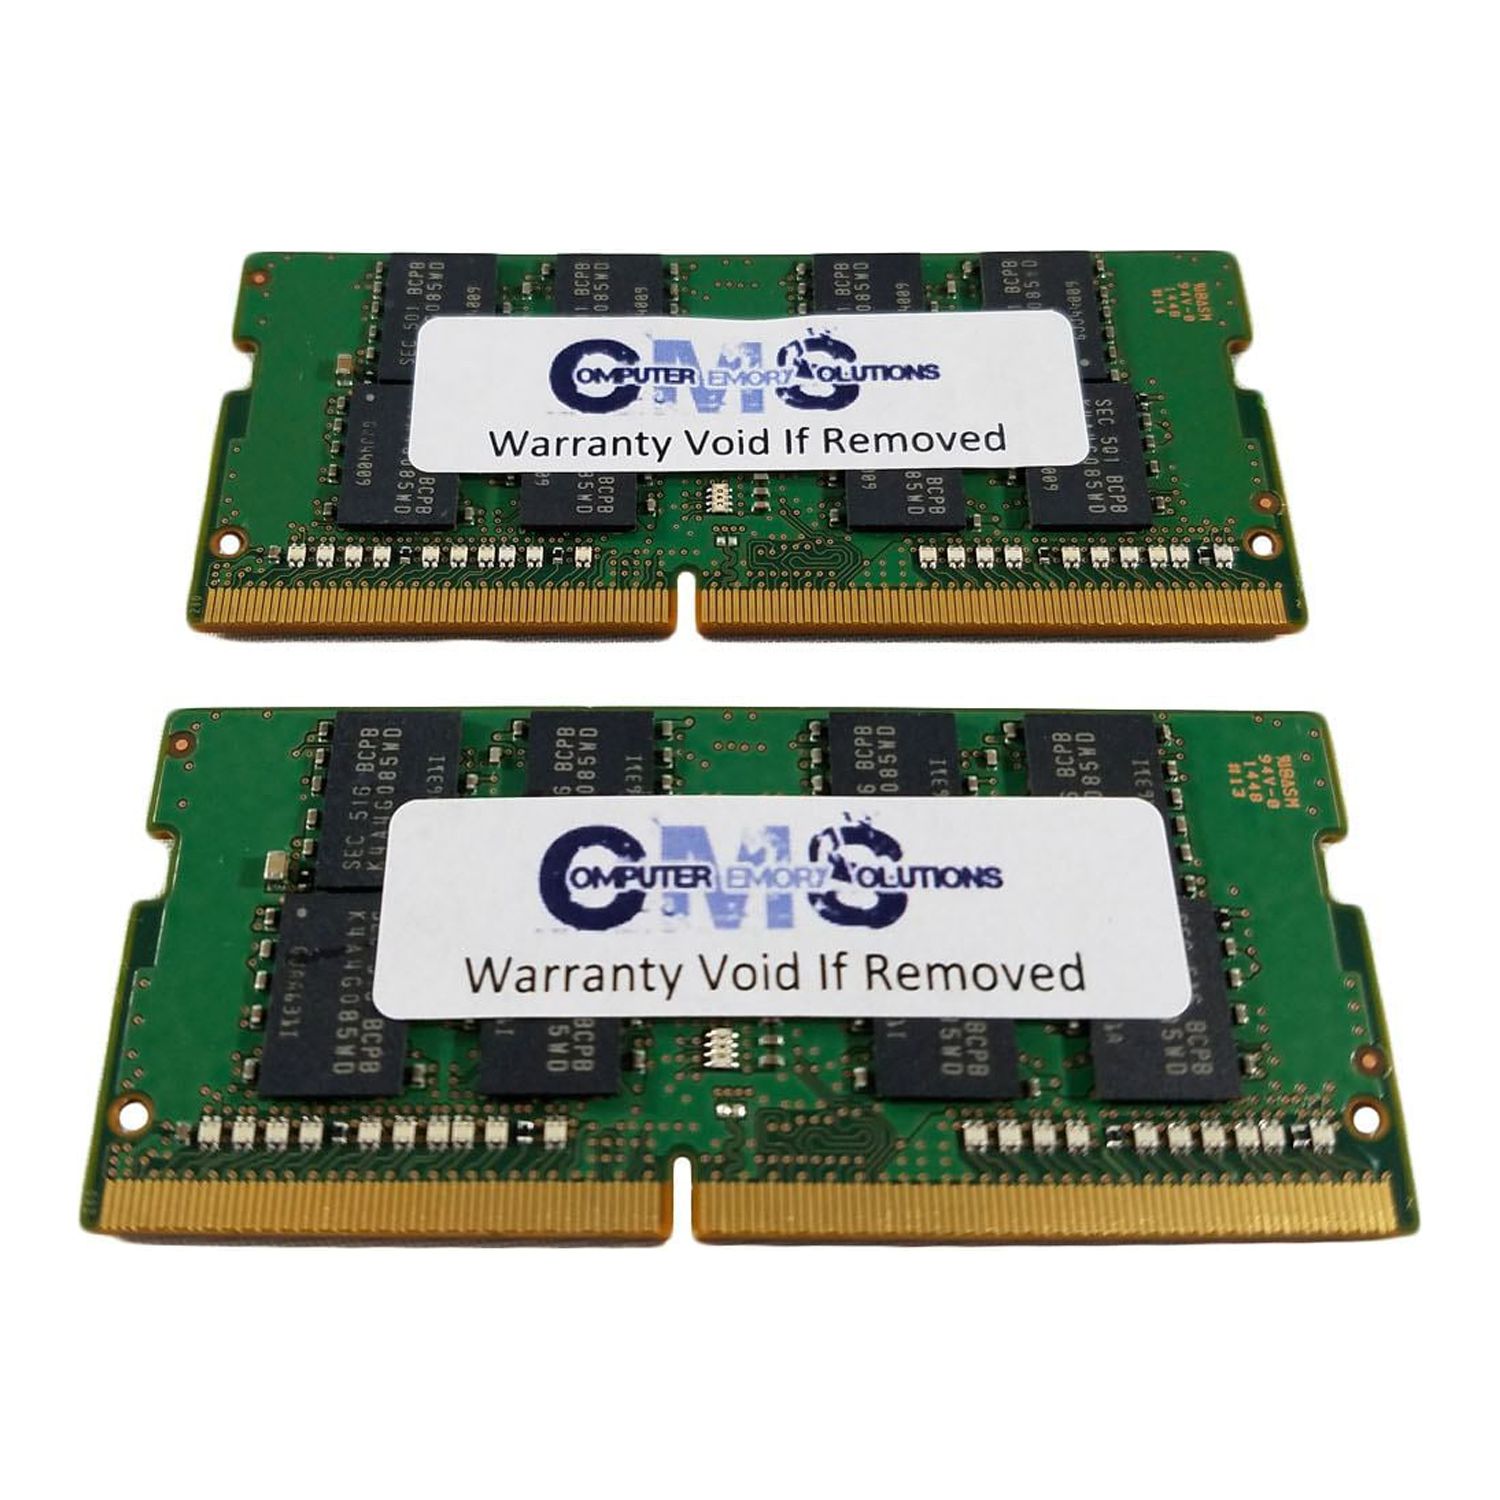 CMS 32GB (2X16GB) DDR4 19200 2400MHZ NON ECC SODIMM Memory Ram Upgrade Compatible with Gigabyte® Mini STX System BRIX GB-BSi5HAC-6300, GB-BSi5HAL-6200, GB-BSi7HA-6500, GB-BSi7HA-6600 - C108 - image 2 of 2